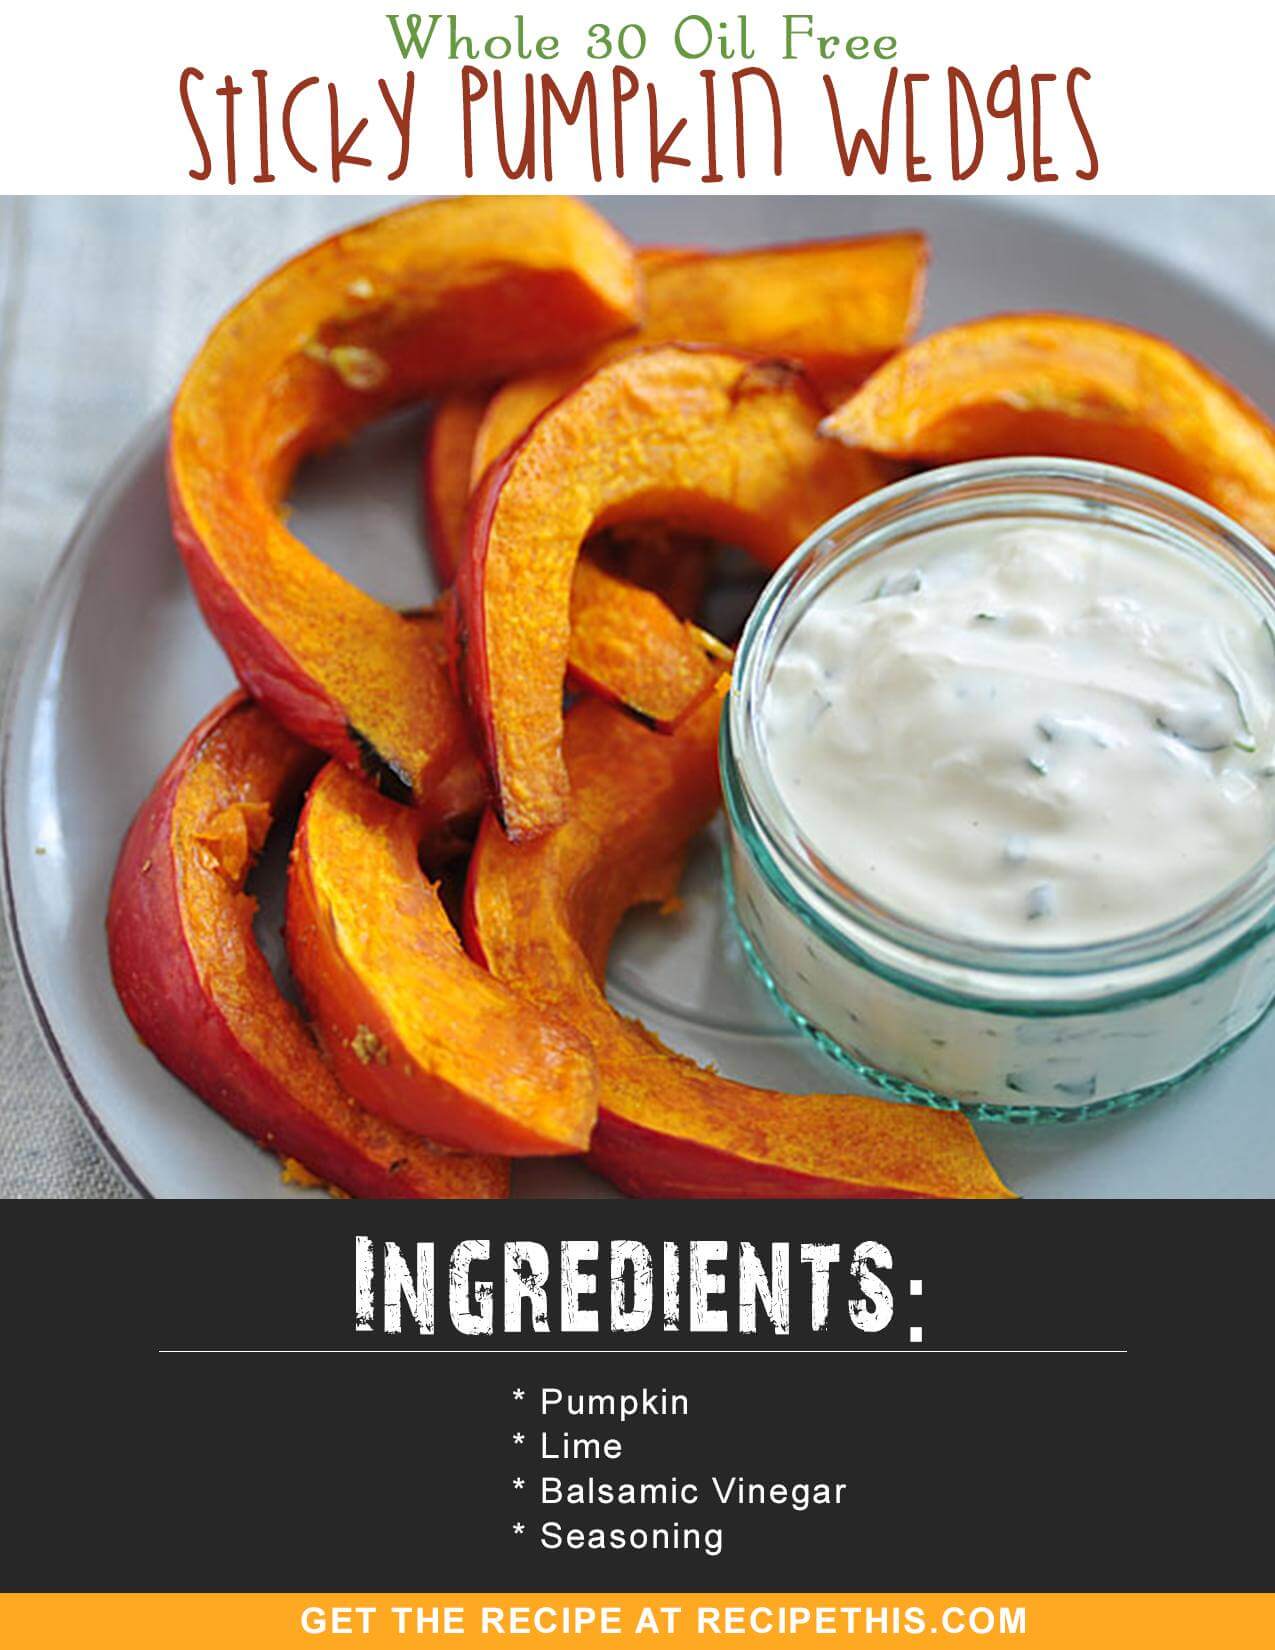 Whole 30 | Whole 30 Oil Free Sticky Pumpkin Wedges Recipe from RecipeThis.com